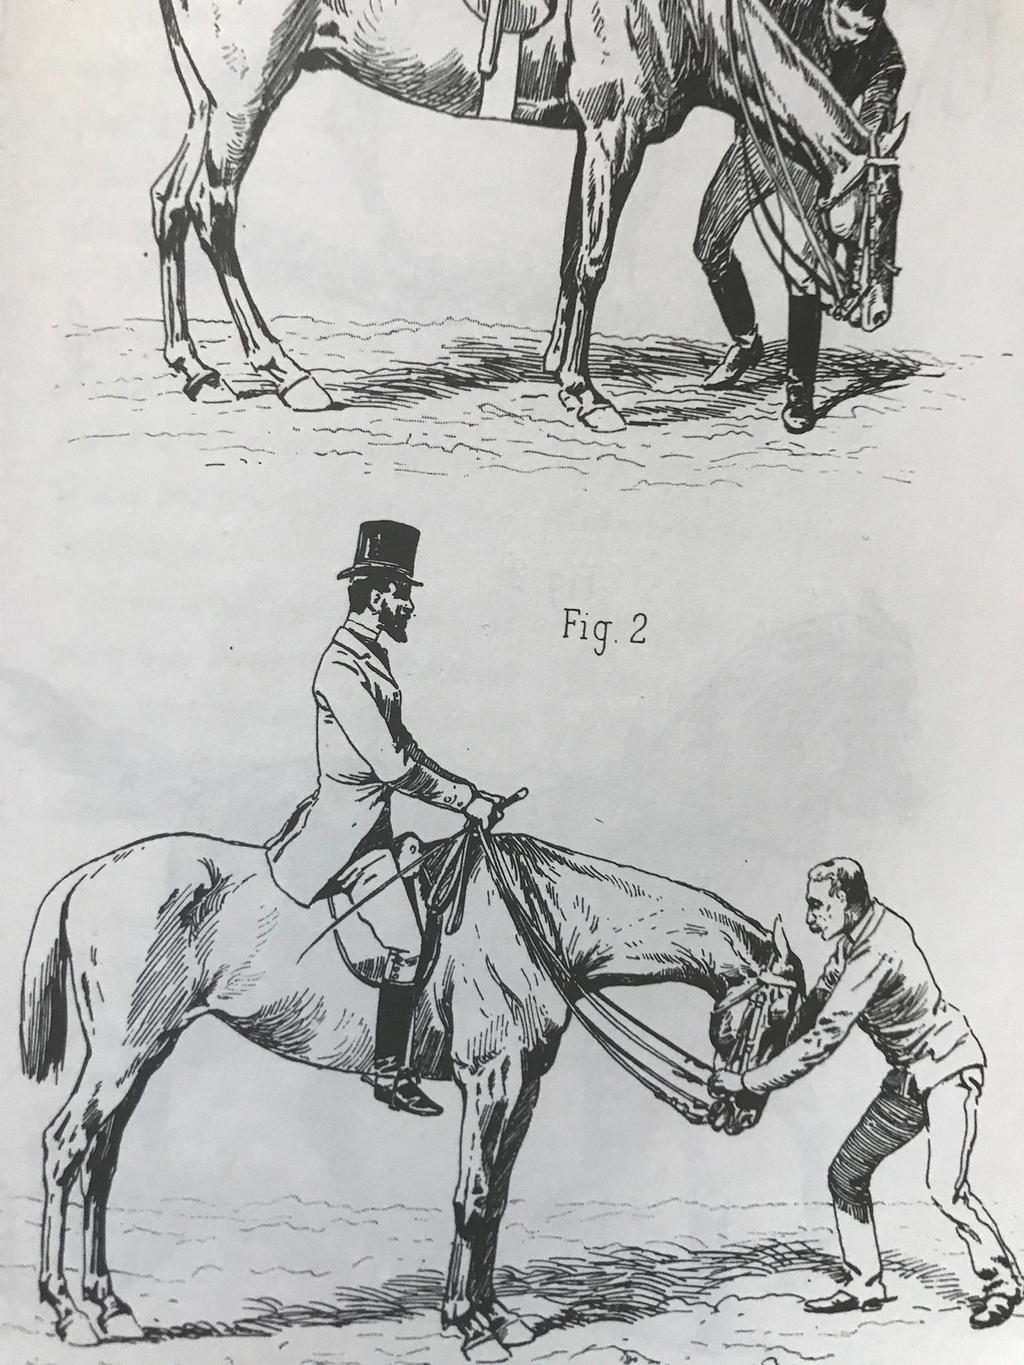 About 50 years later (1890) Jame Fillis in his book Principes de dressage et d equitation insisted in many pages of his book of the need of those flexions to have a horse flexible, loose, and